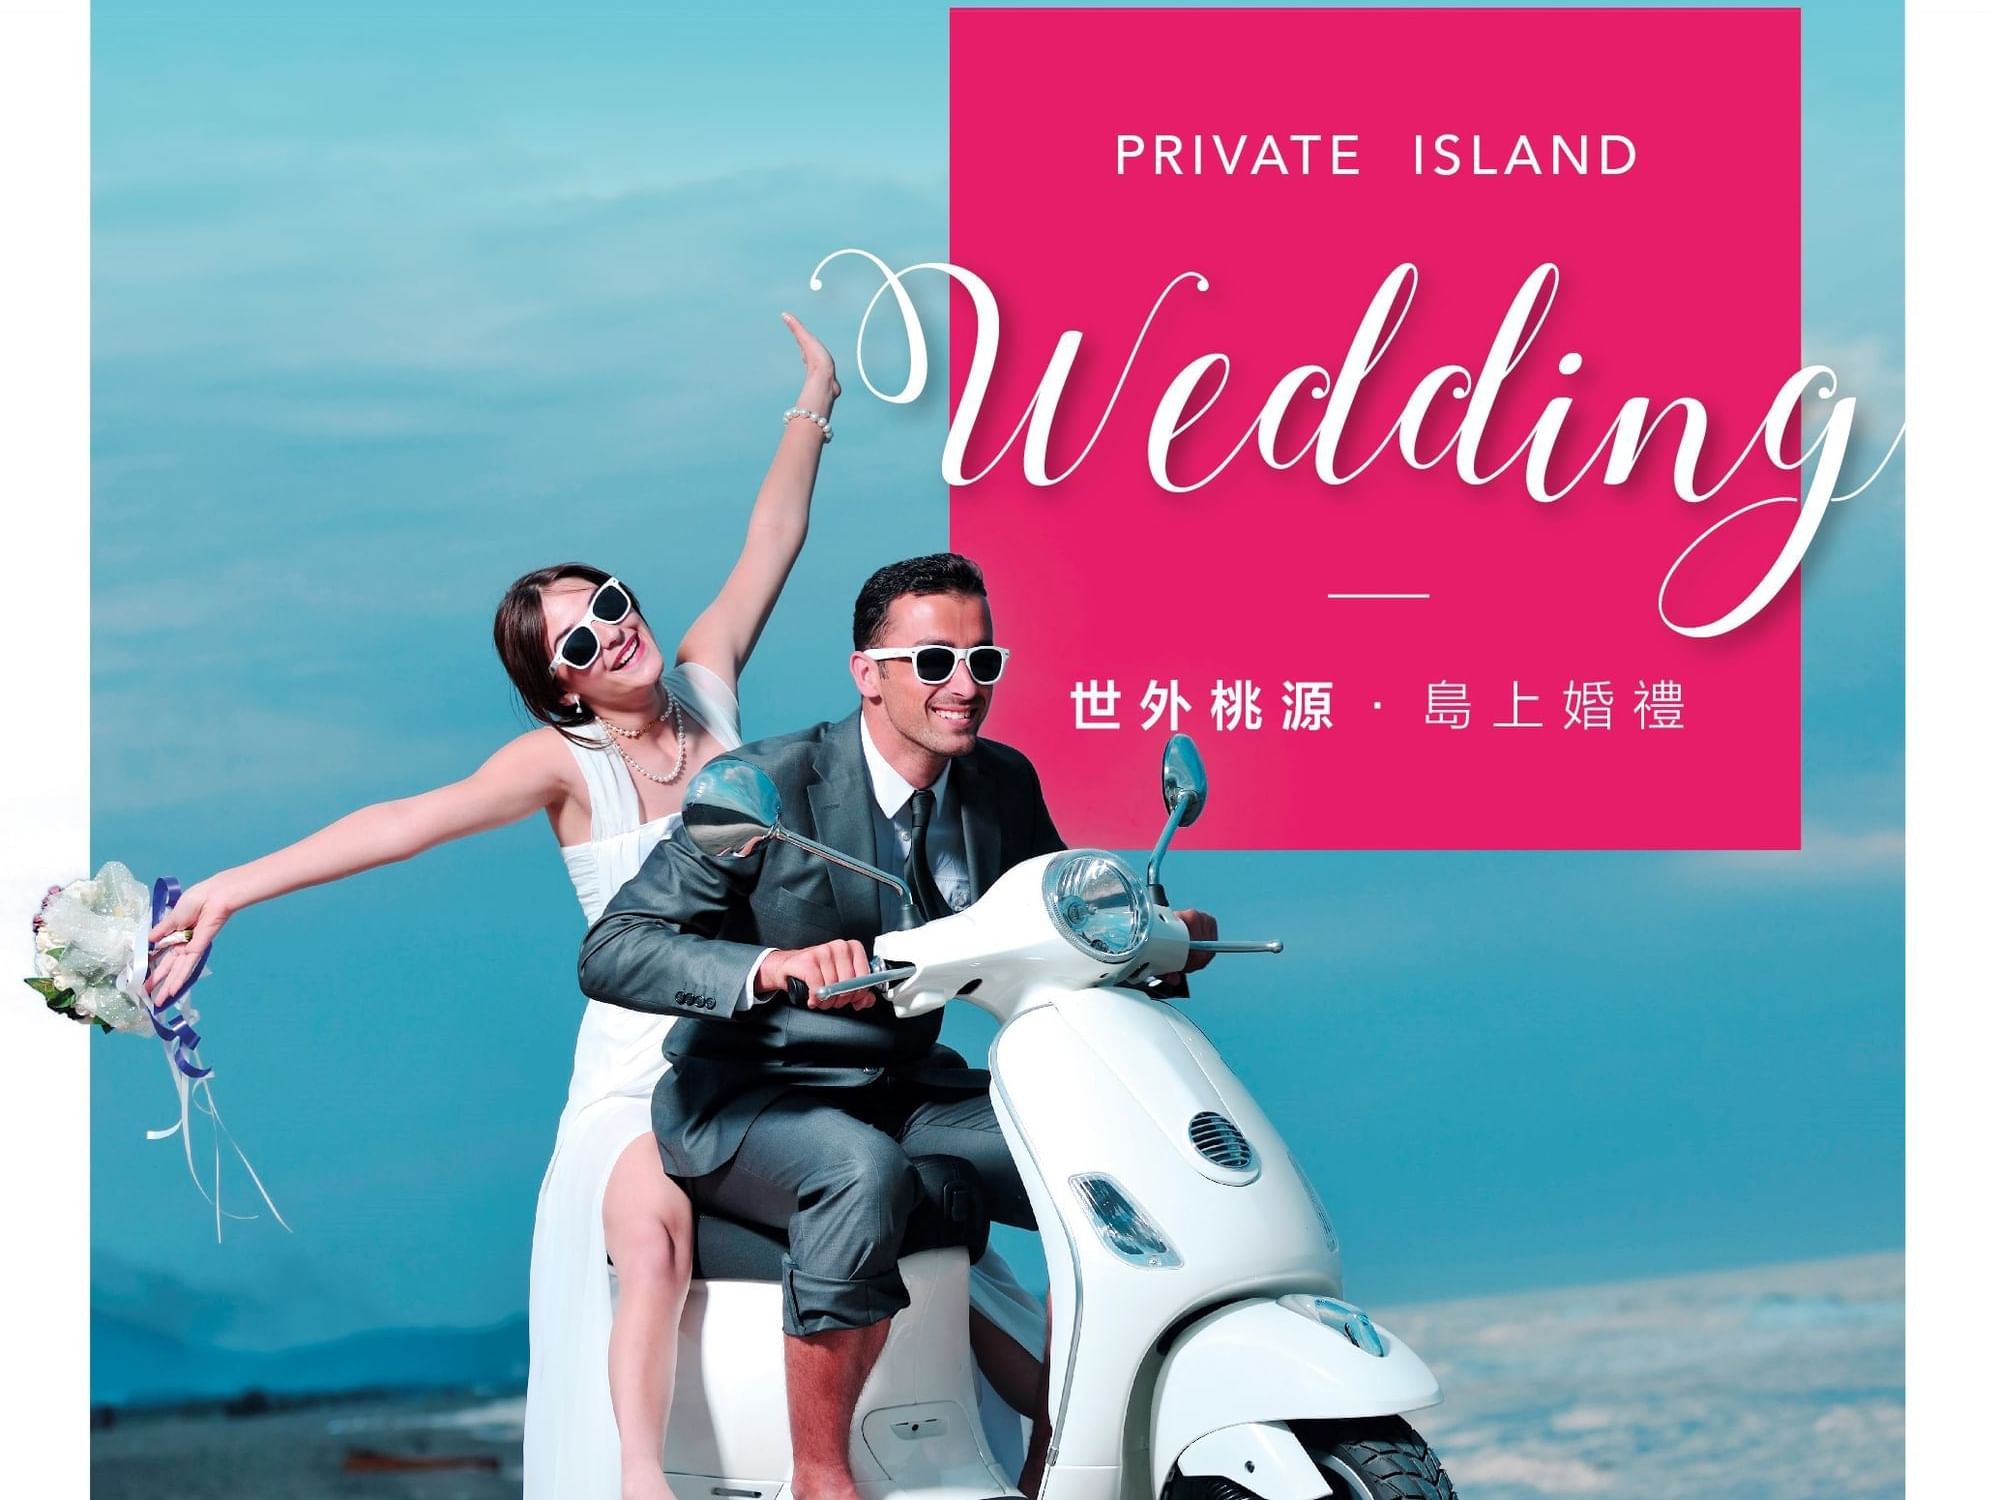 Offer poster for Private island wedding at Grand Coloane Resort